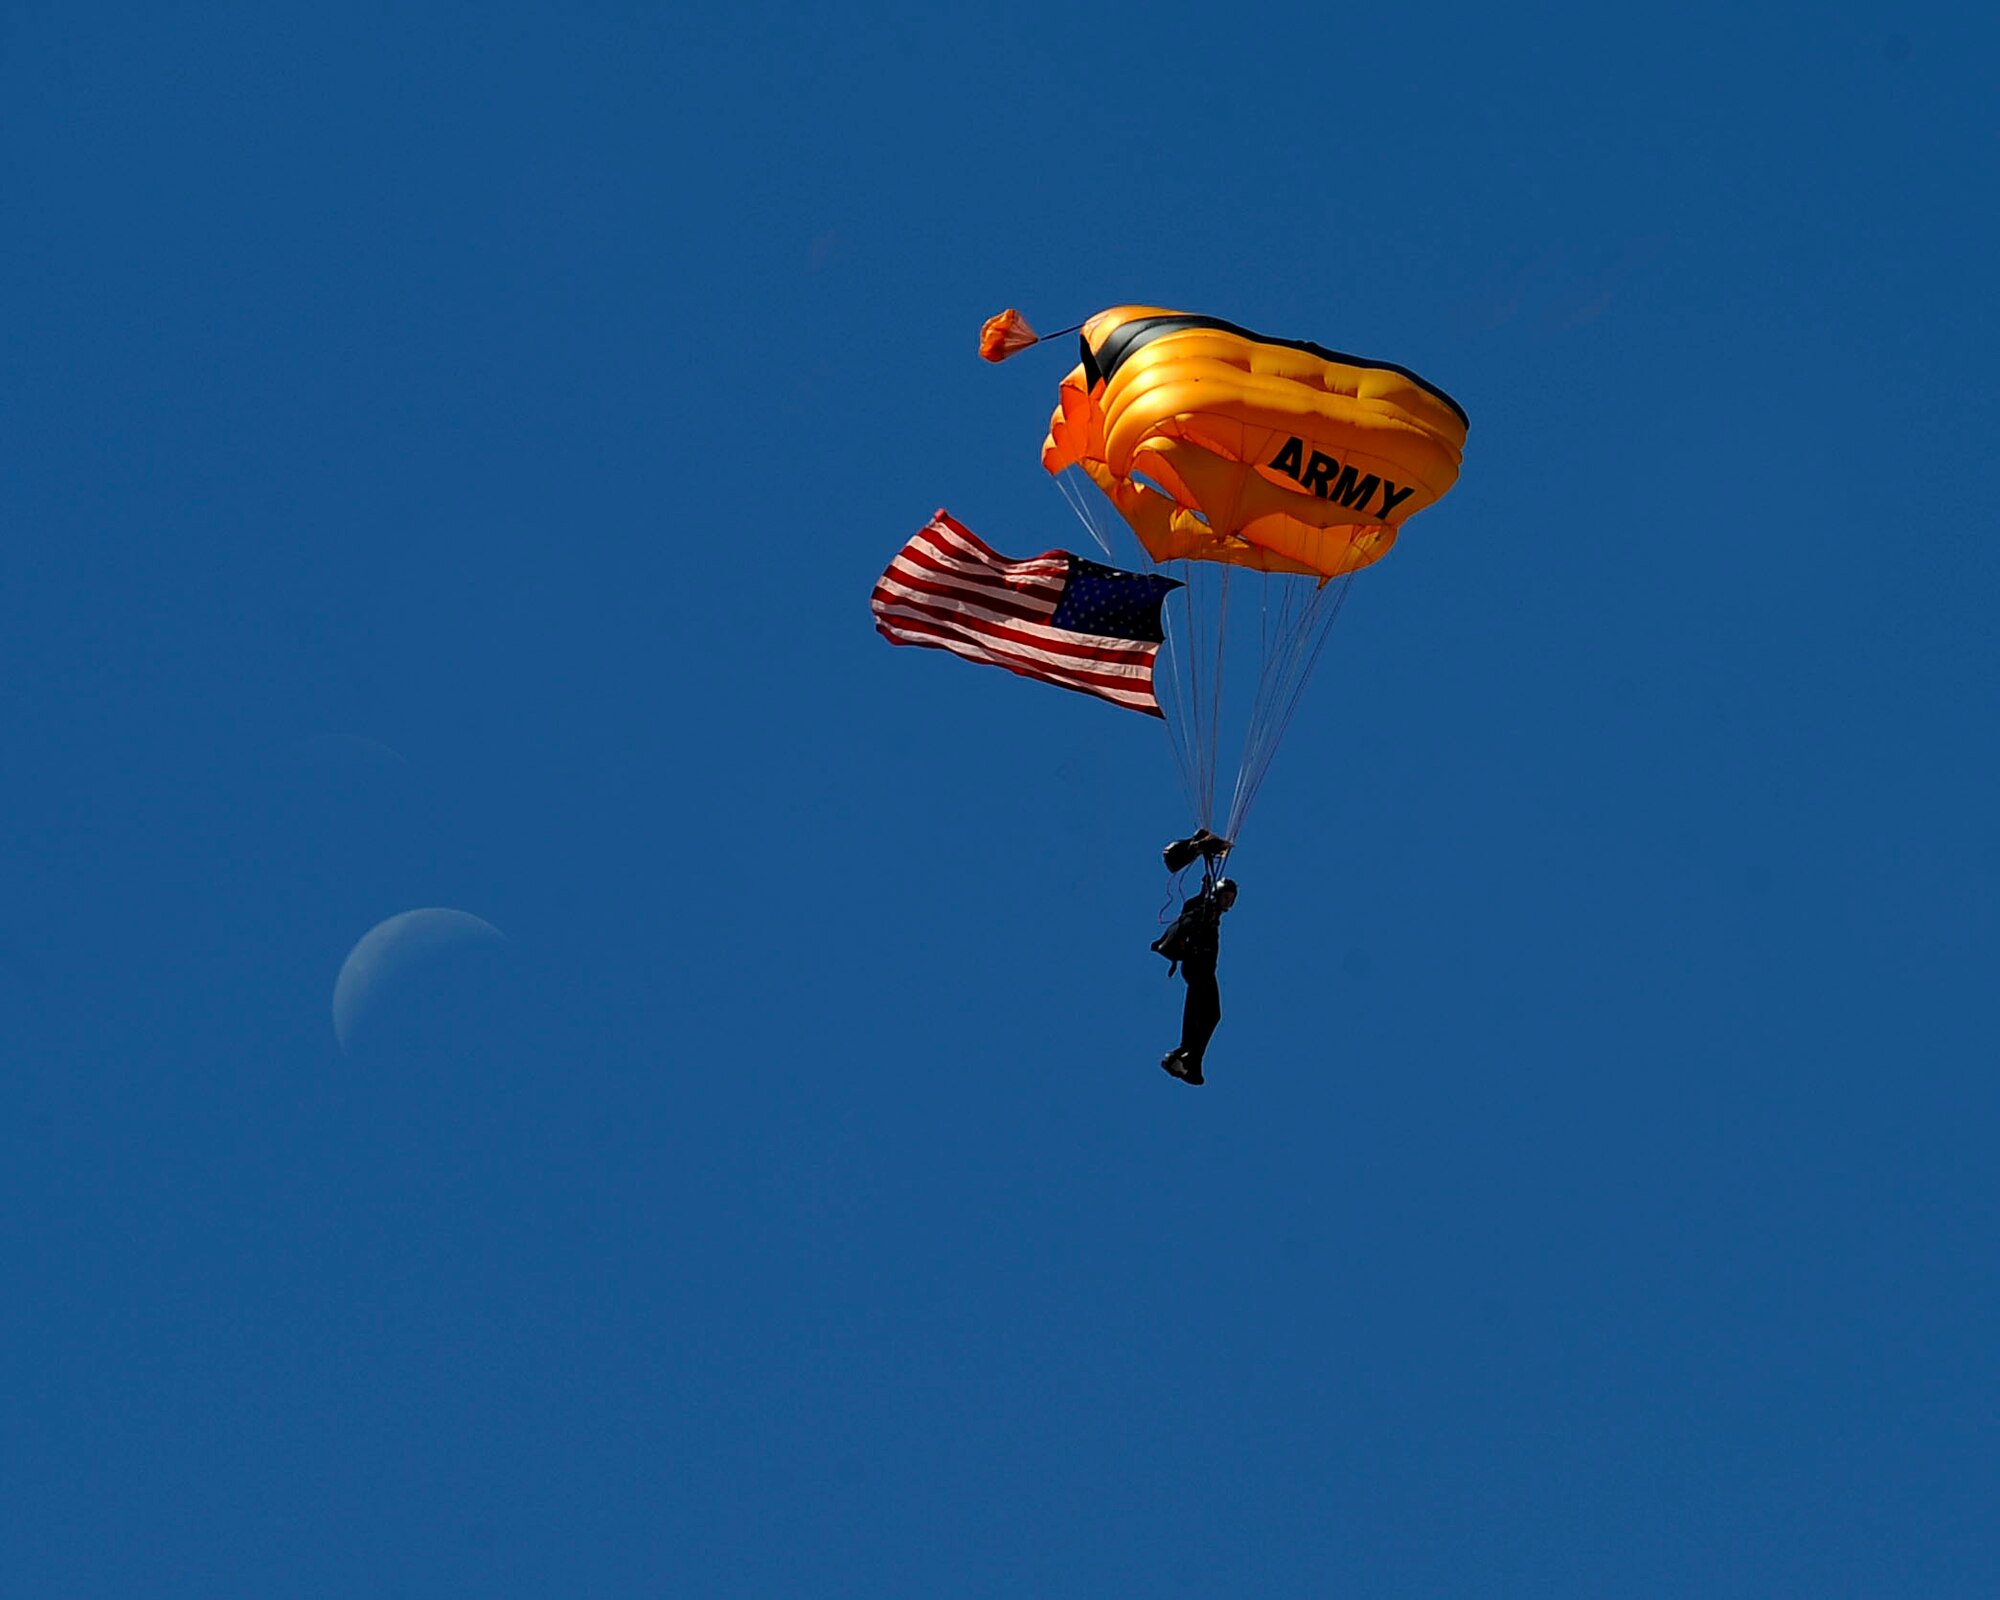 A member of the U.S. Army's Golden Knights descends on Luke Air Force Base Apr. 3, 2016.  The Golden Knights were the opening act for the Luke Air Force Base air show, 75 Years of Airpower.  (U.S. Air Force photo by Airman 1st Class Pedro Mota)